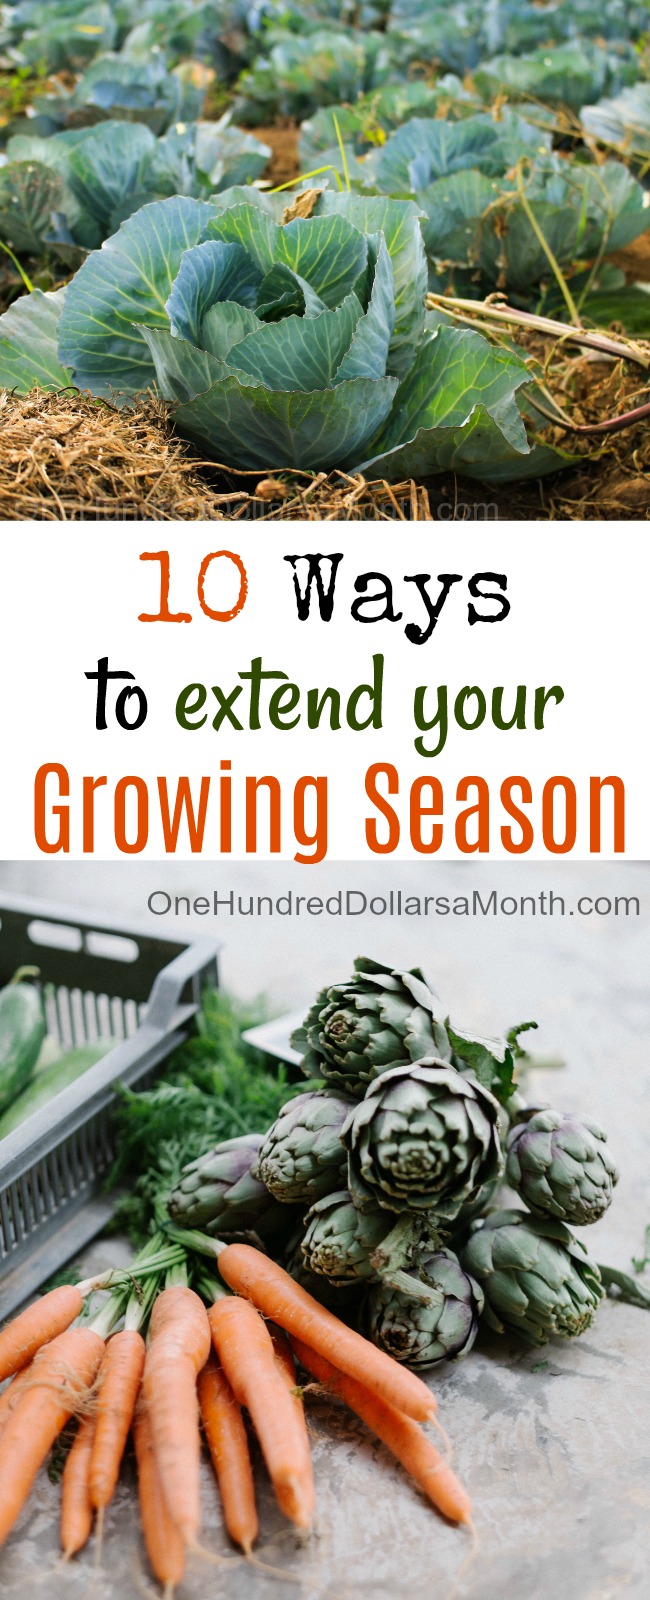 10 Ways to Extend Your Growing Season